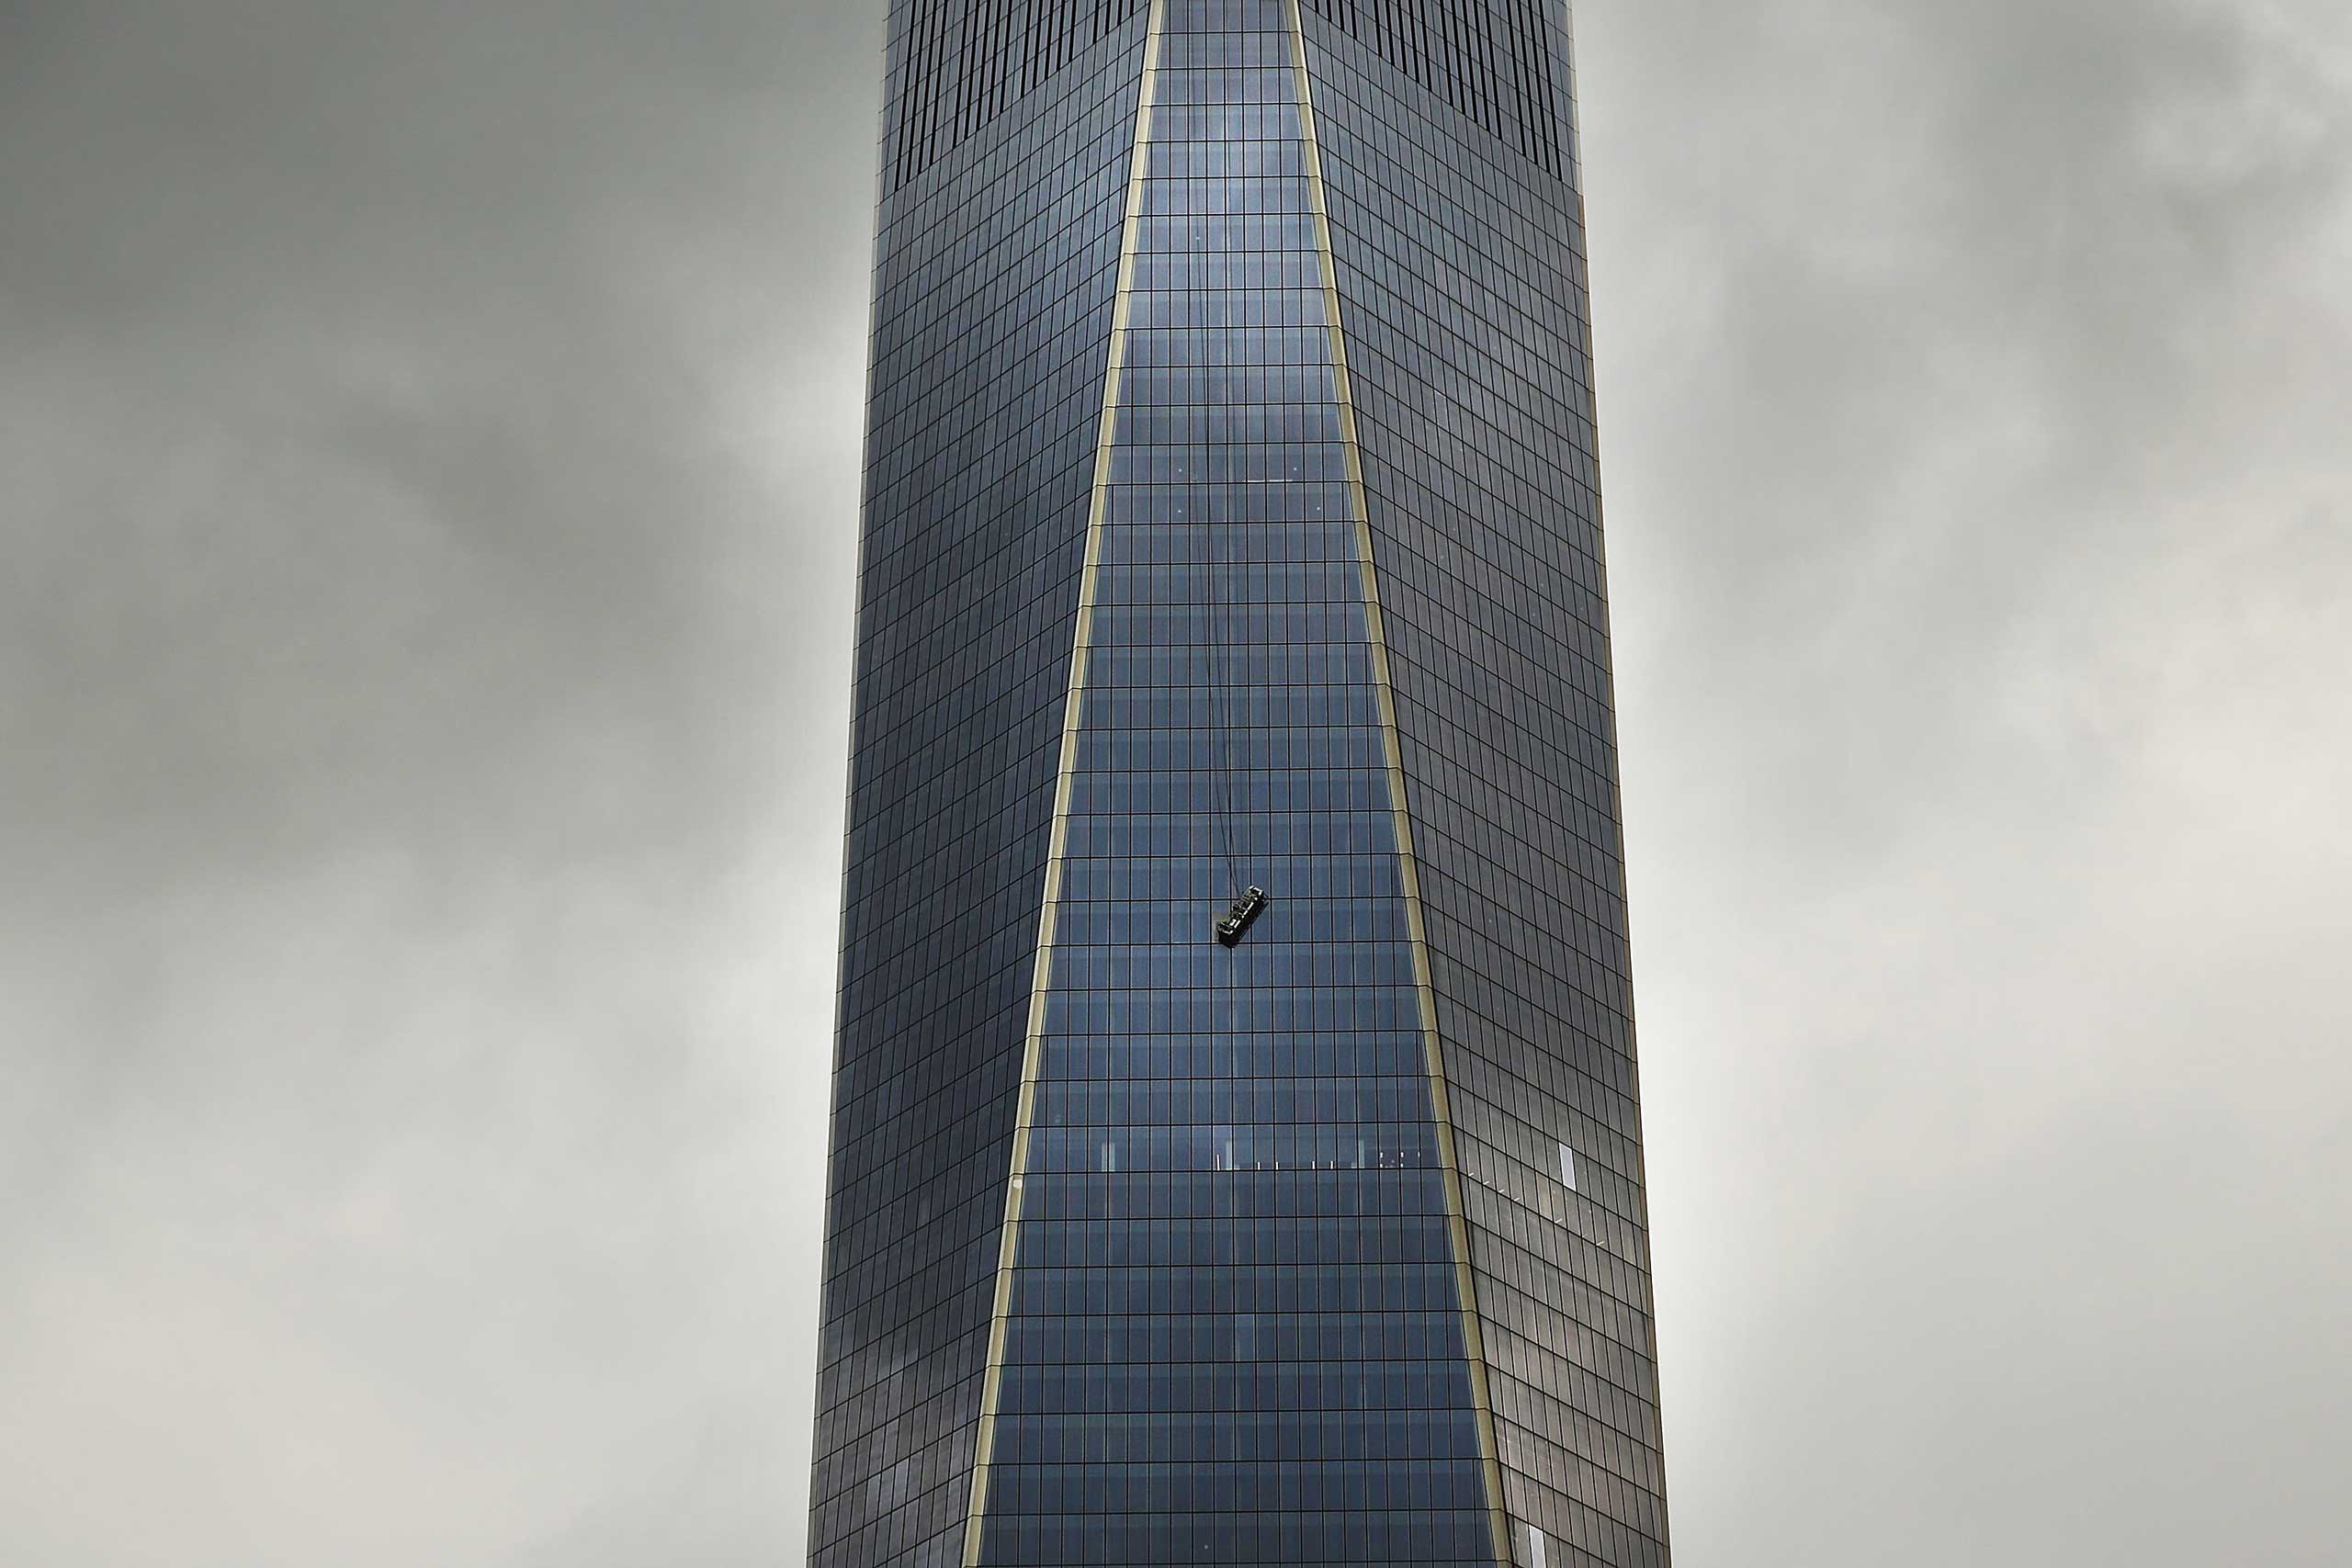 A scaffold carrying two workers hangs 69 floors up at One World Trade Center in New York City on Nov. 12, 2014.